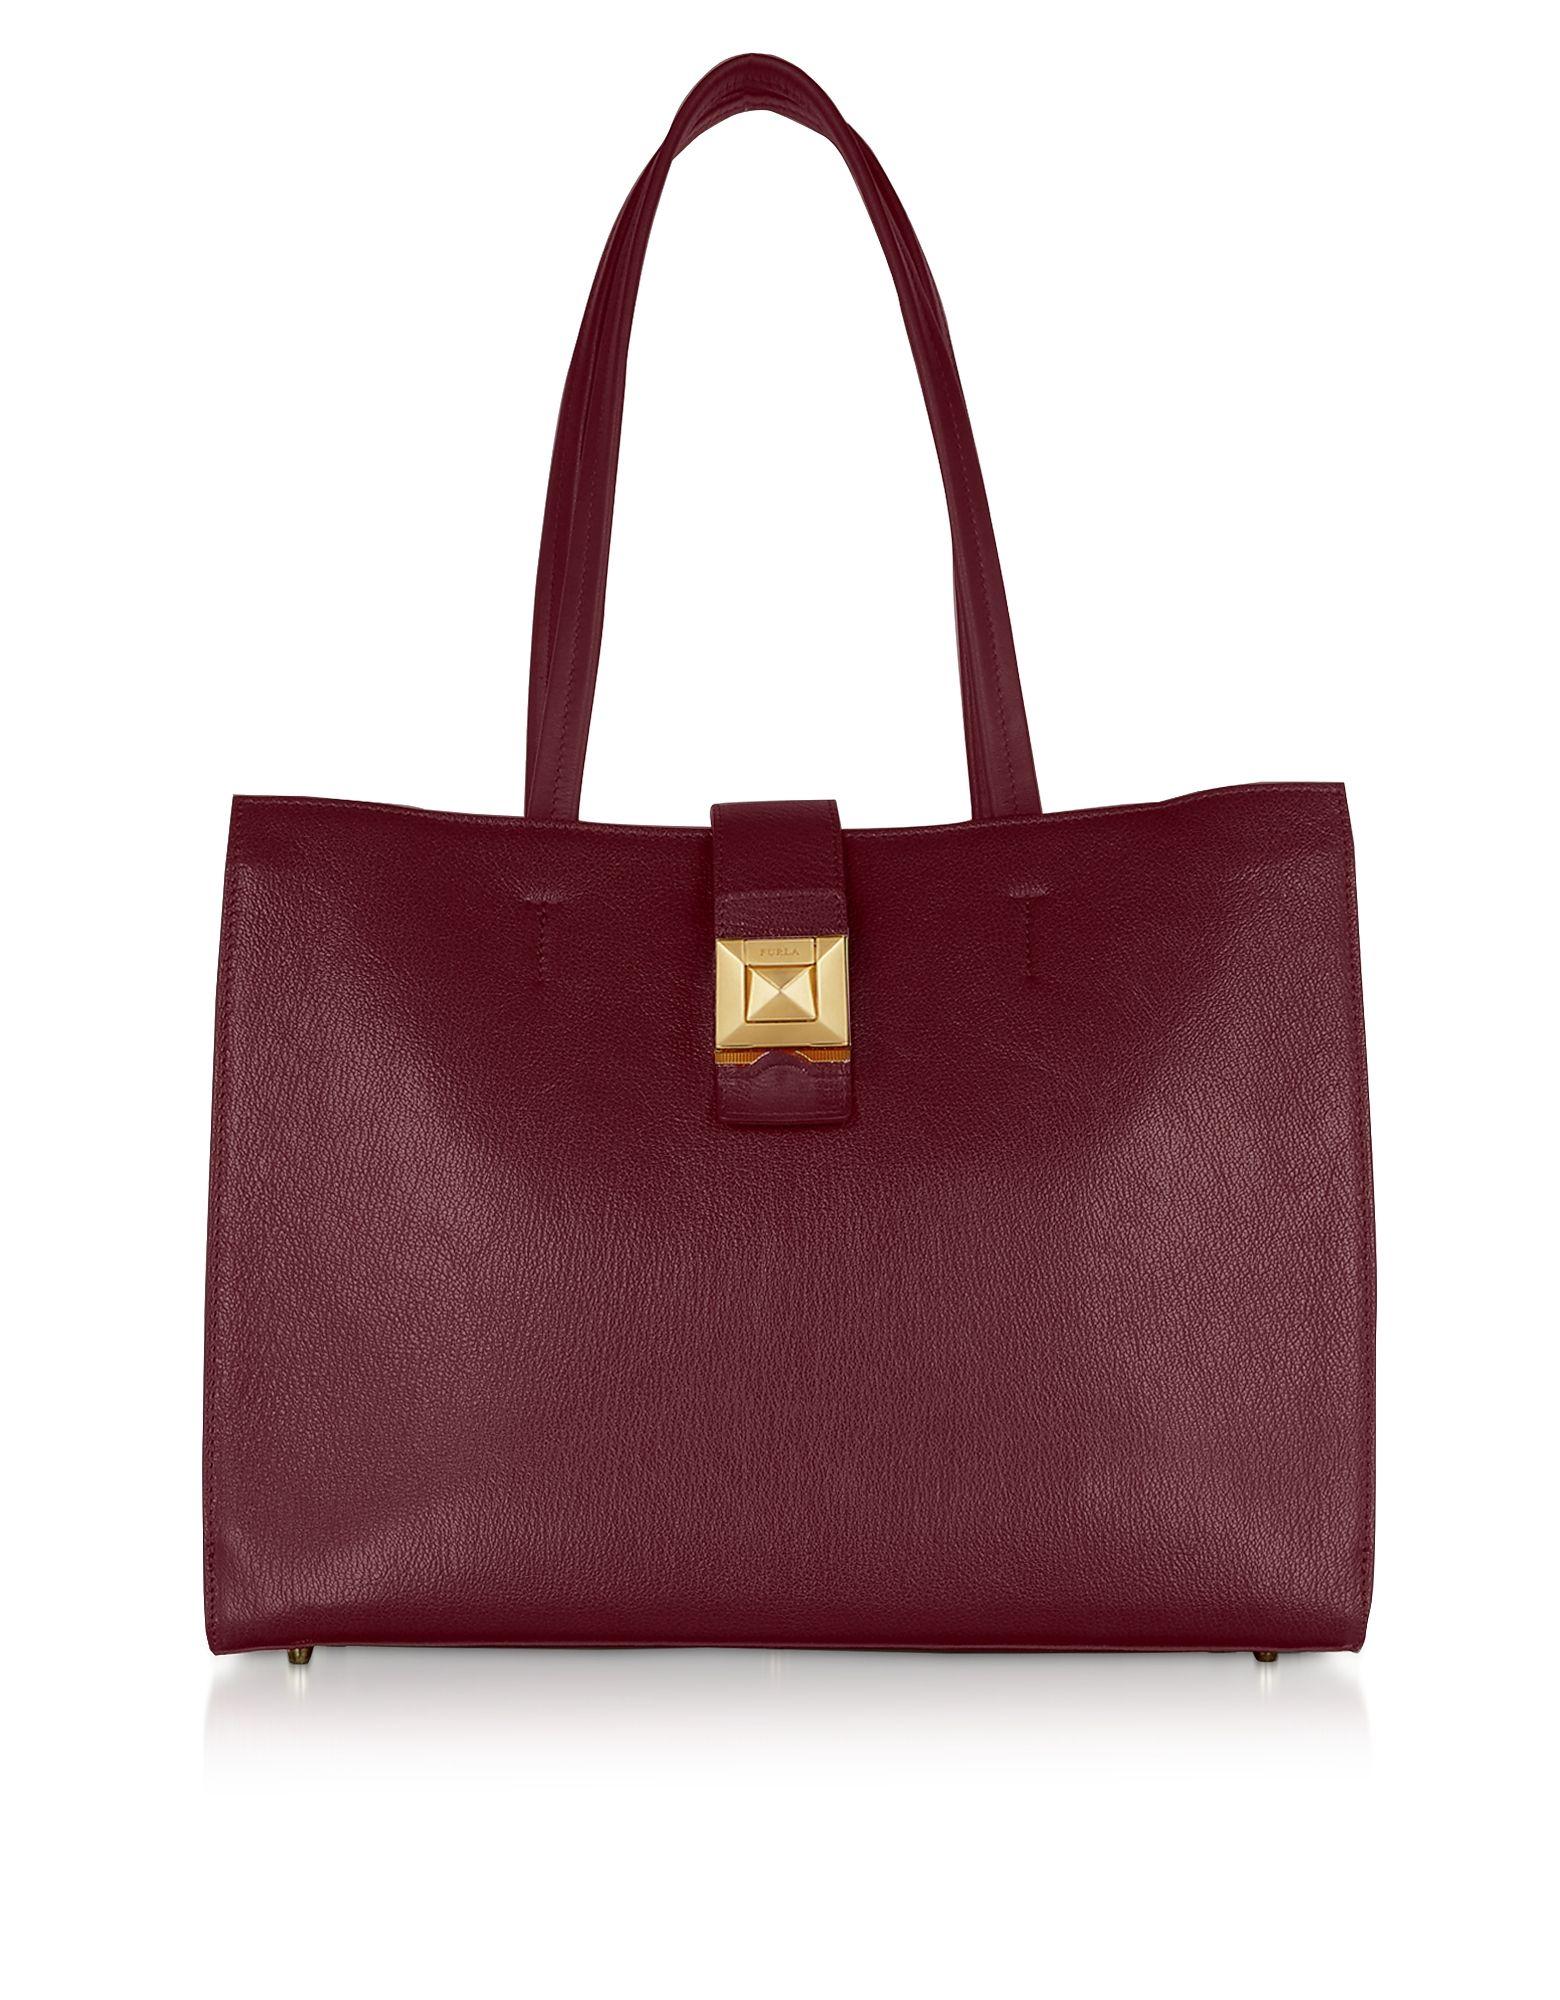 Furla Red Leather Handbag in Red - Lyst